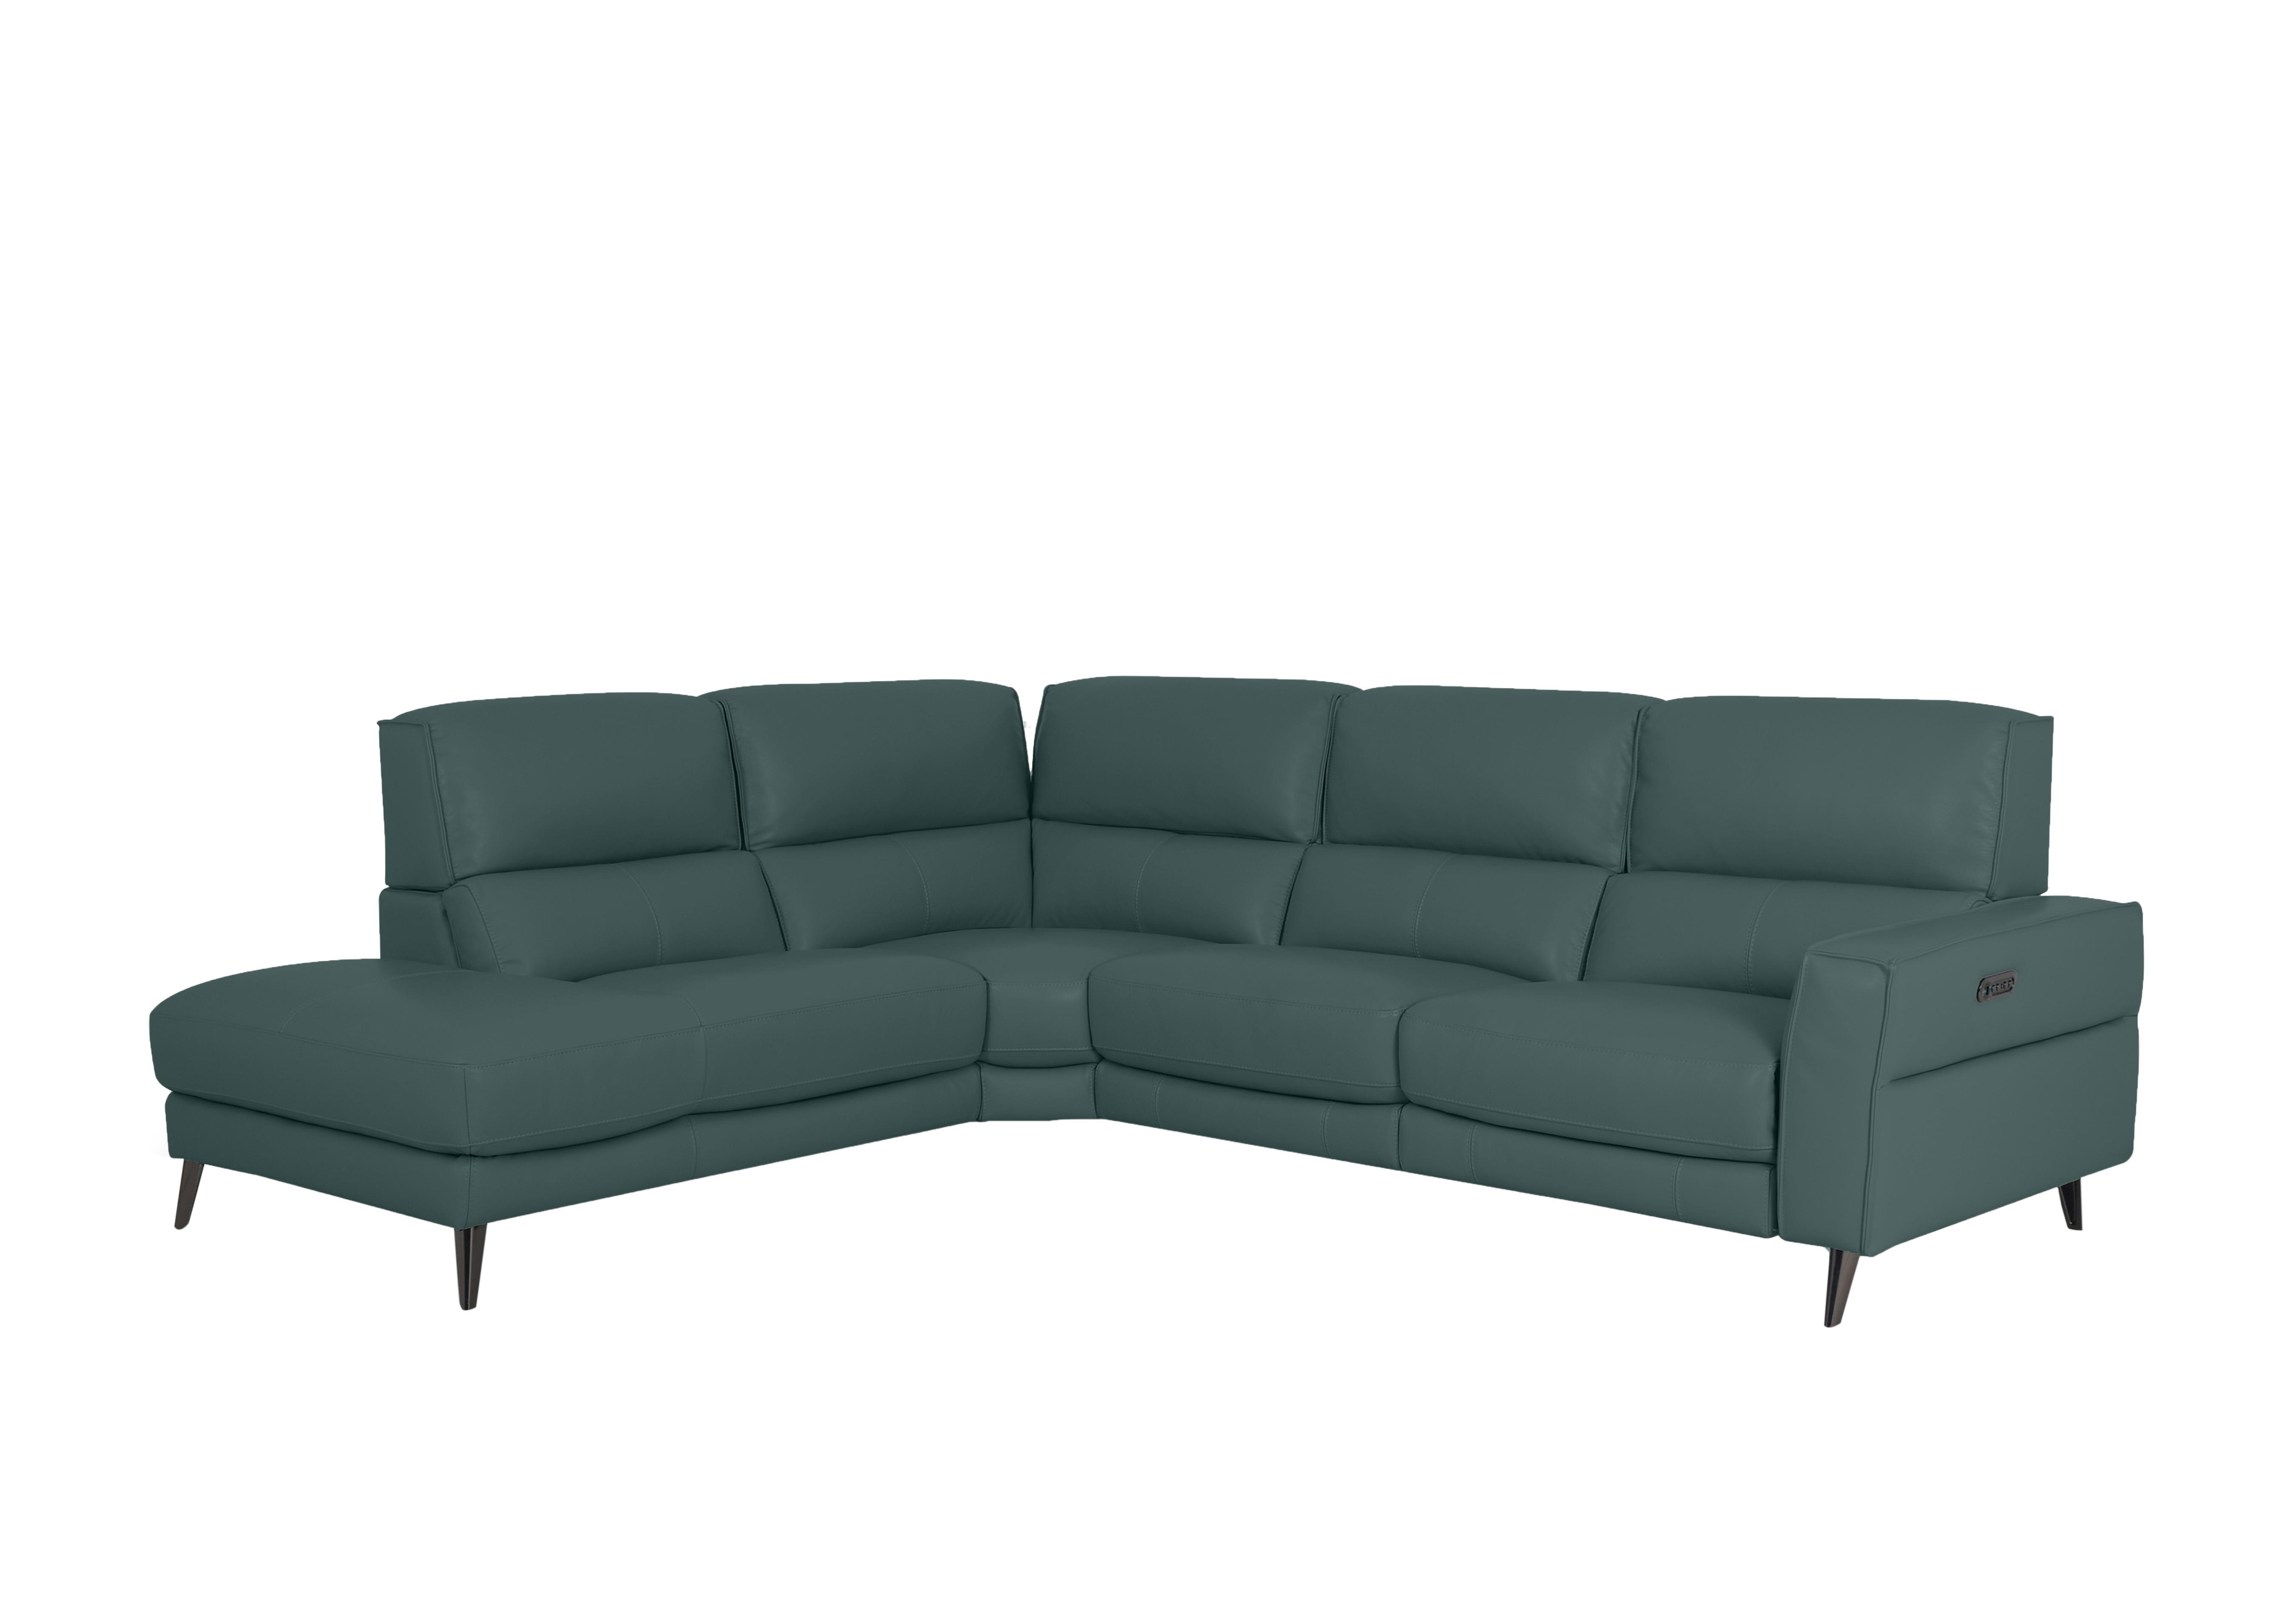 Axel Leather Chaise End Sofa in Bv-301e Lake Green on Furniture Village